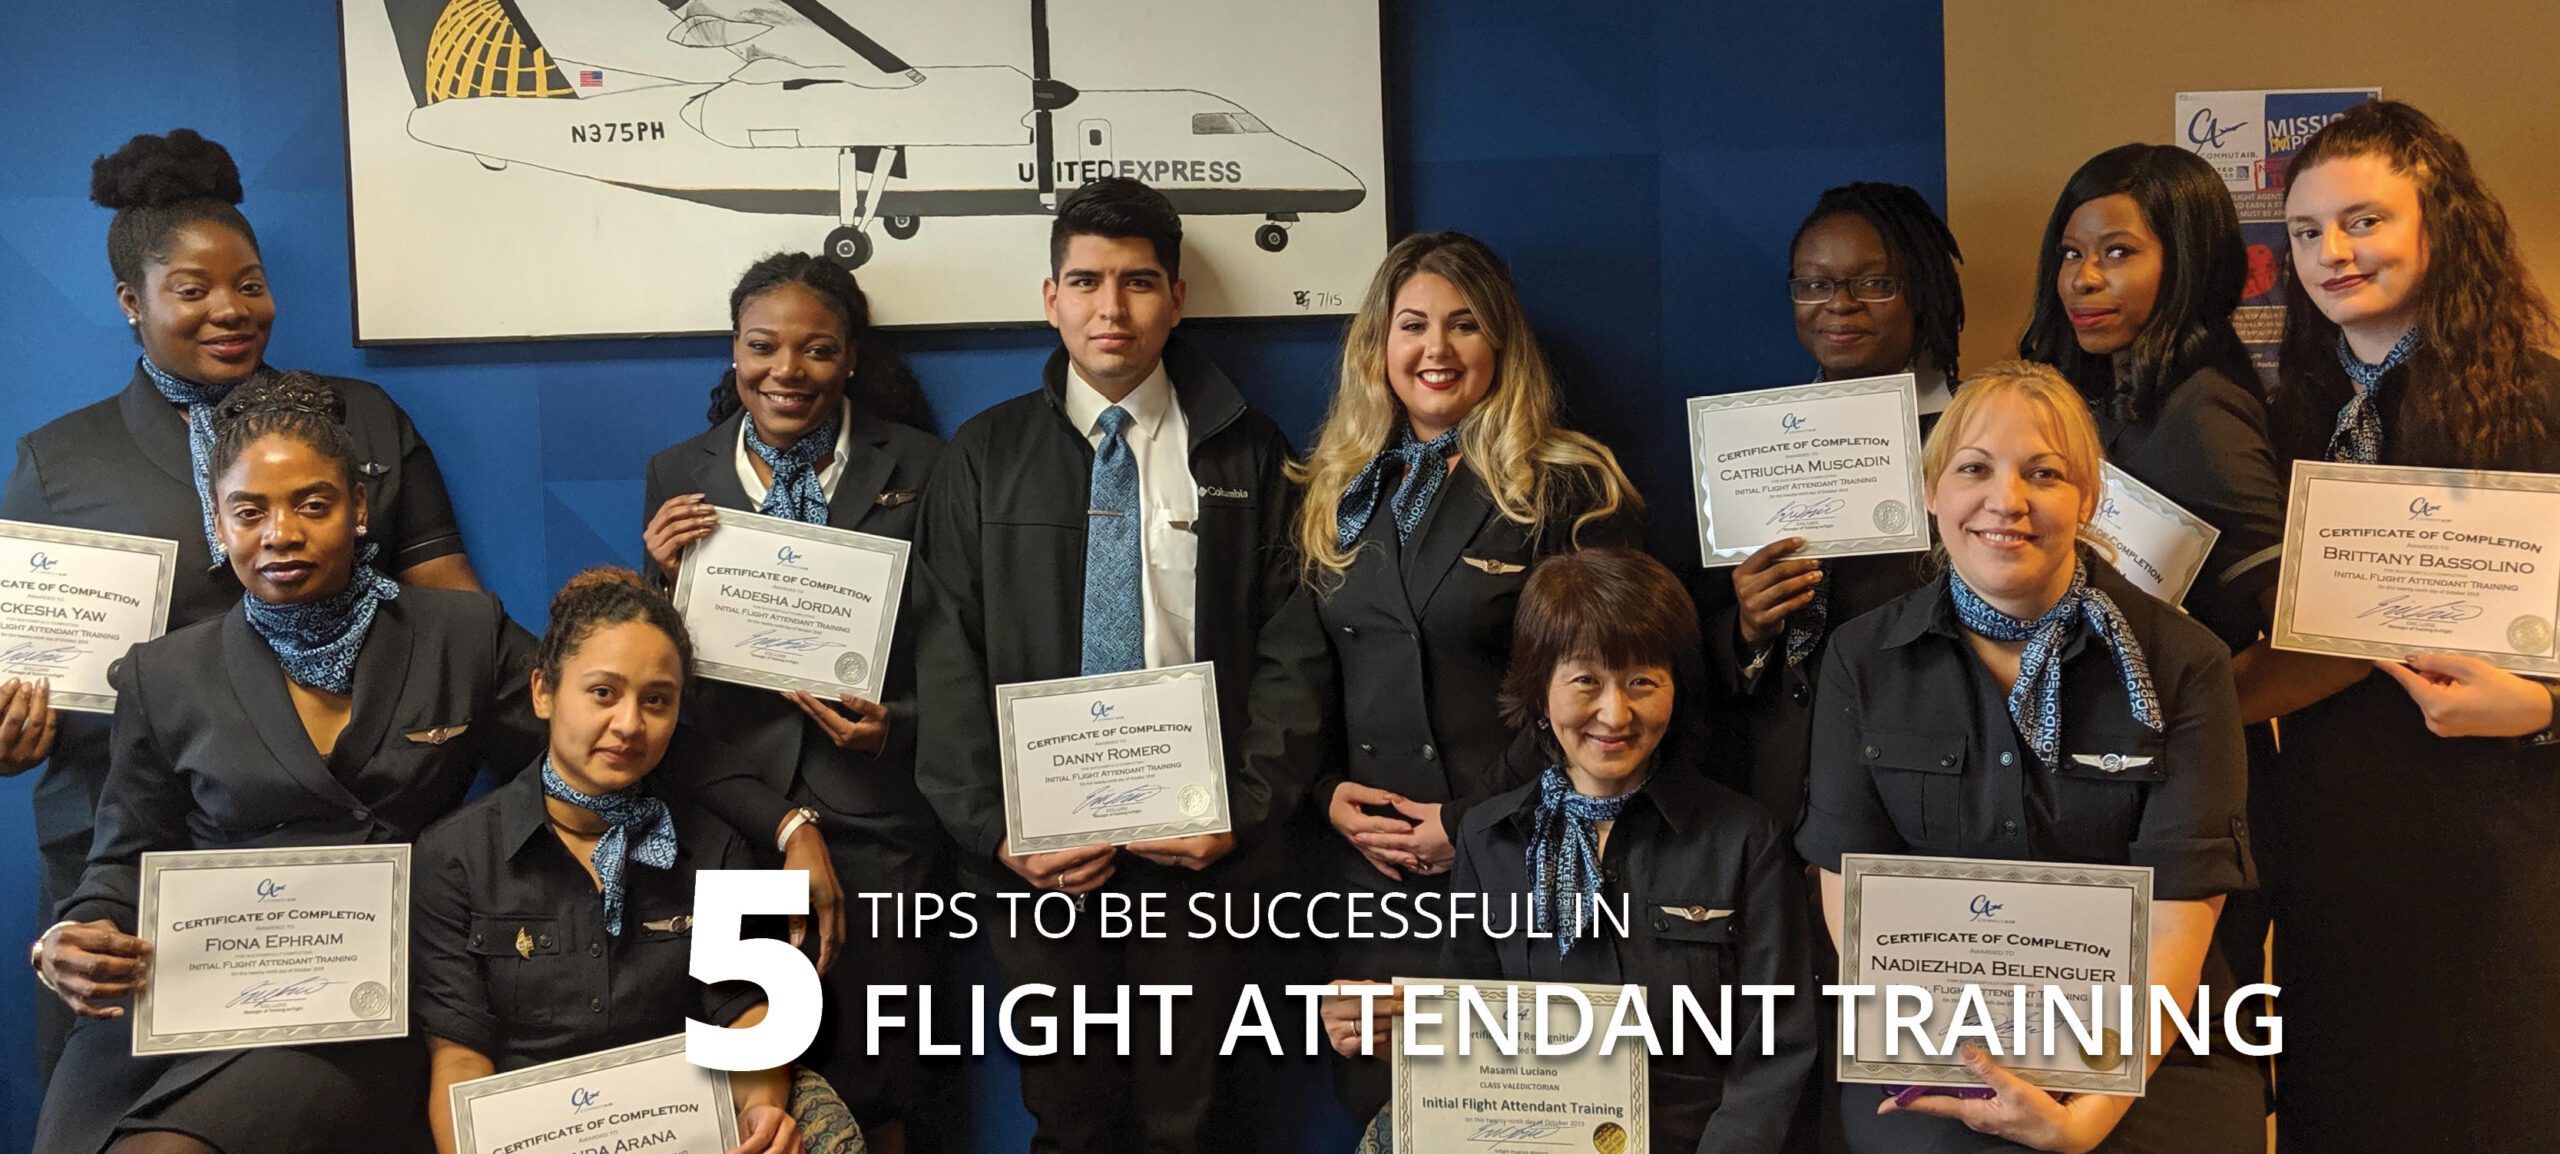 How to Be a Flight Attendant